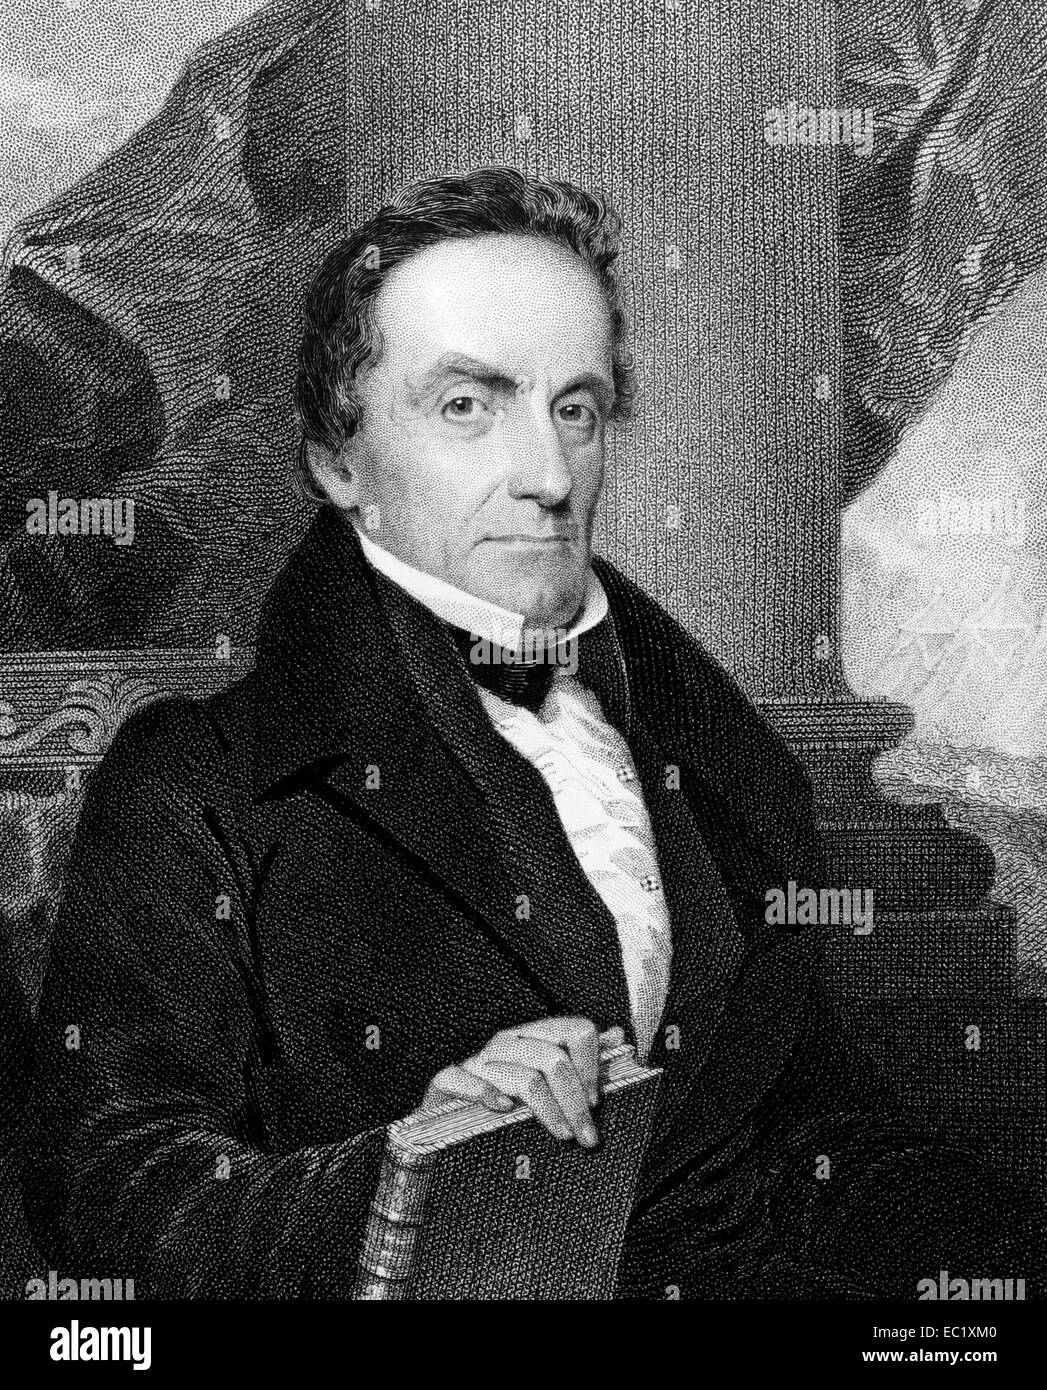 Lewis Cass (1782-1866) on engraving from 1834. American military officer and politician. Stock Photo